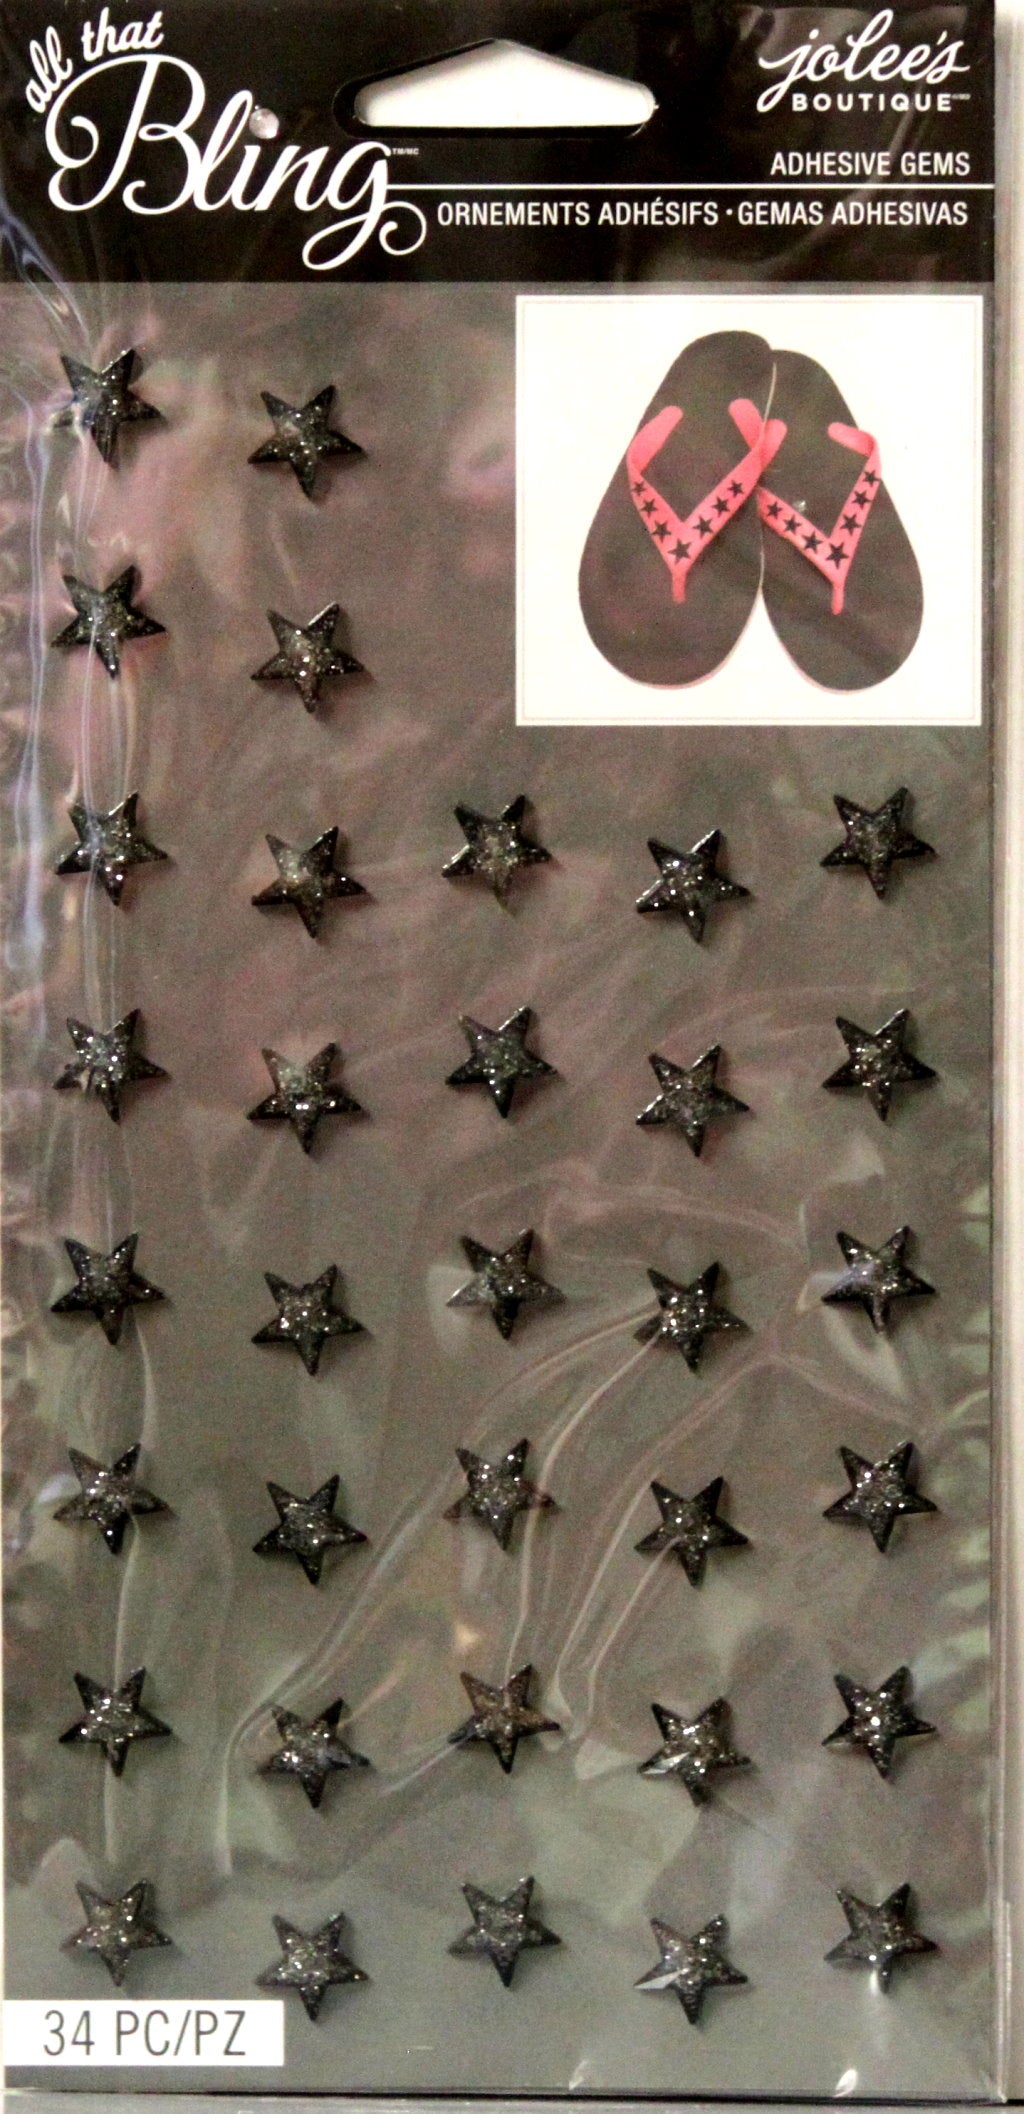 Jolee's Boutique All That Bling Black Sparkle Star Adhesive Gems Bling